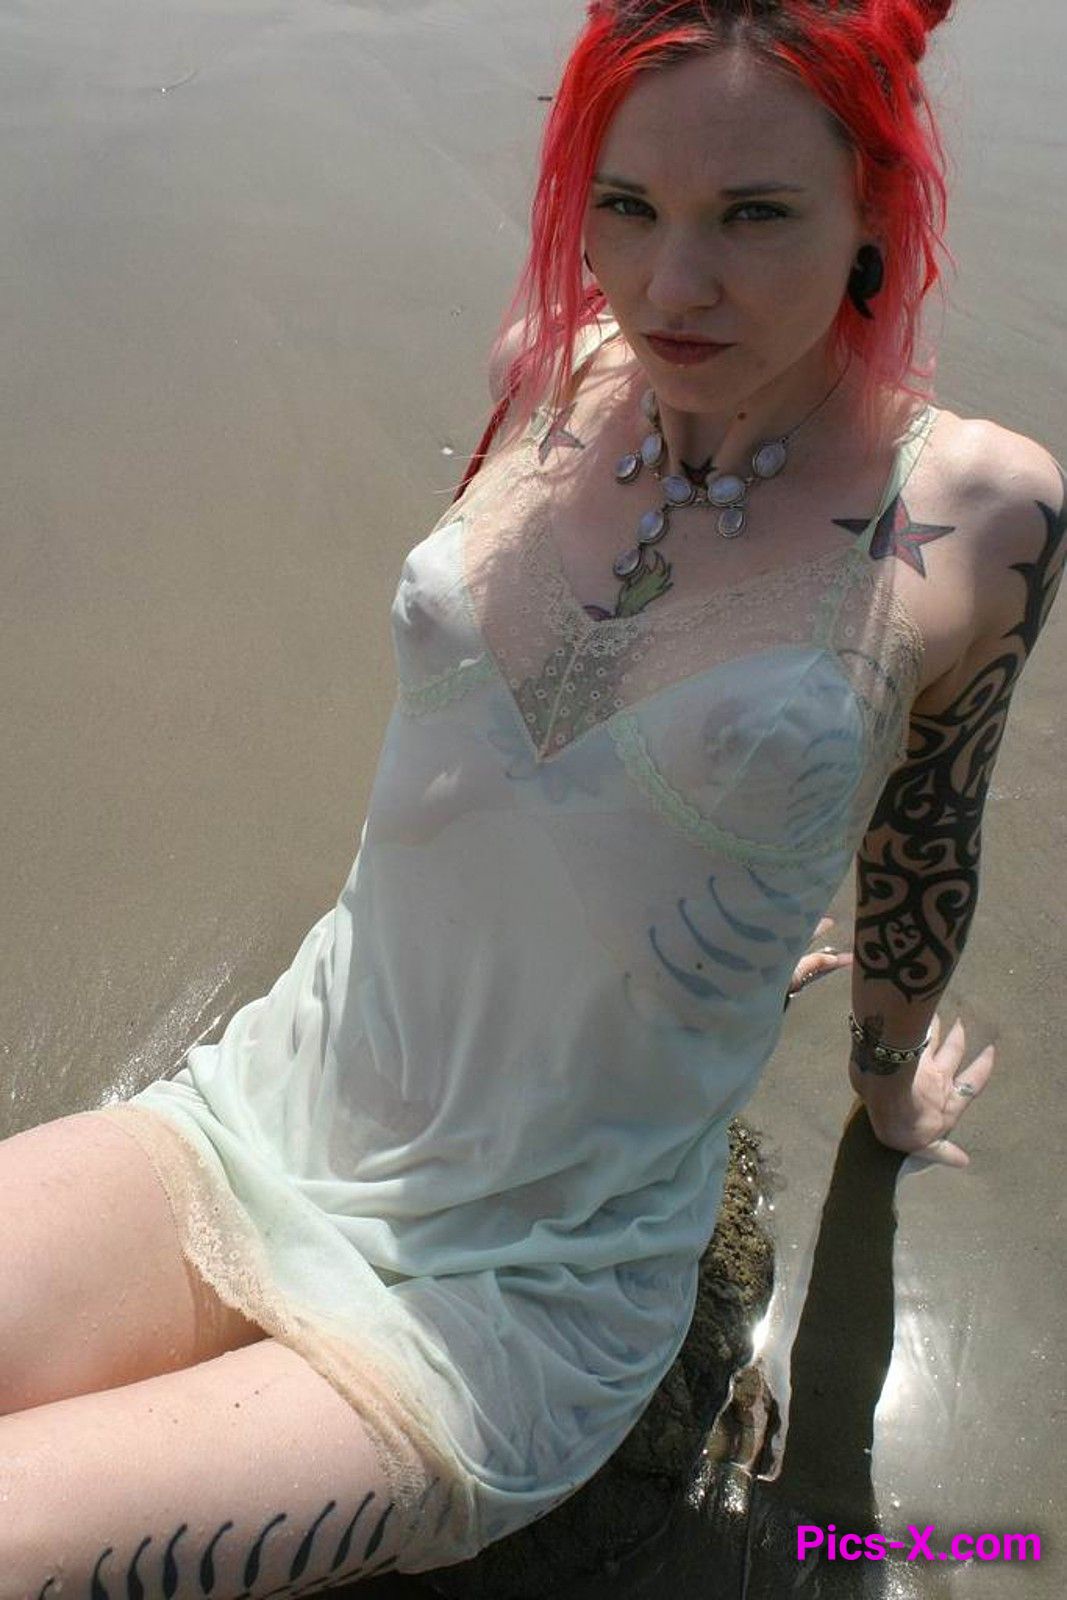 Inked up goth girl playing in the waves at a beach - Punk Rock Girlfriend - Image 21